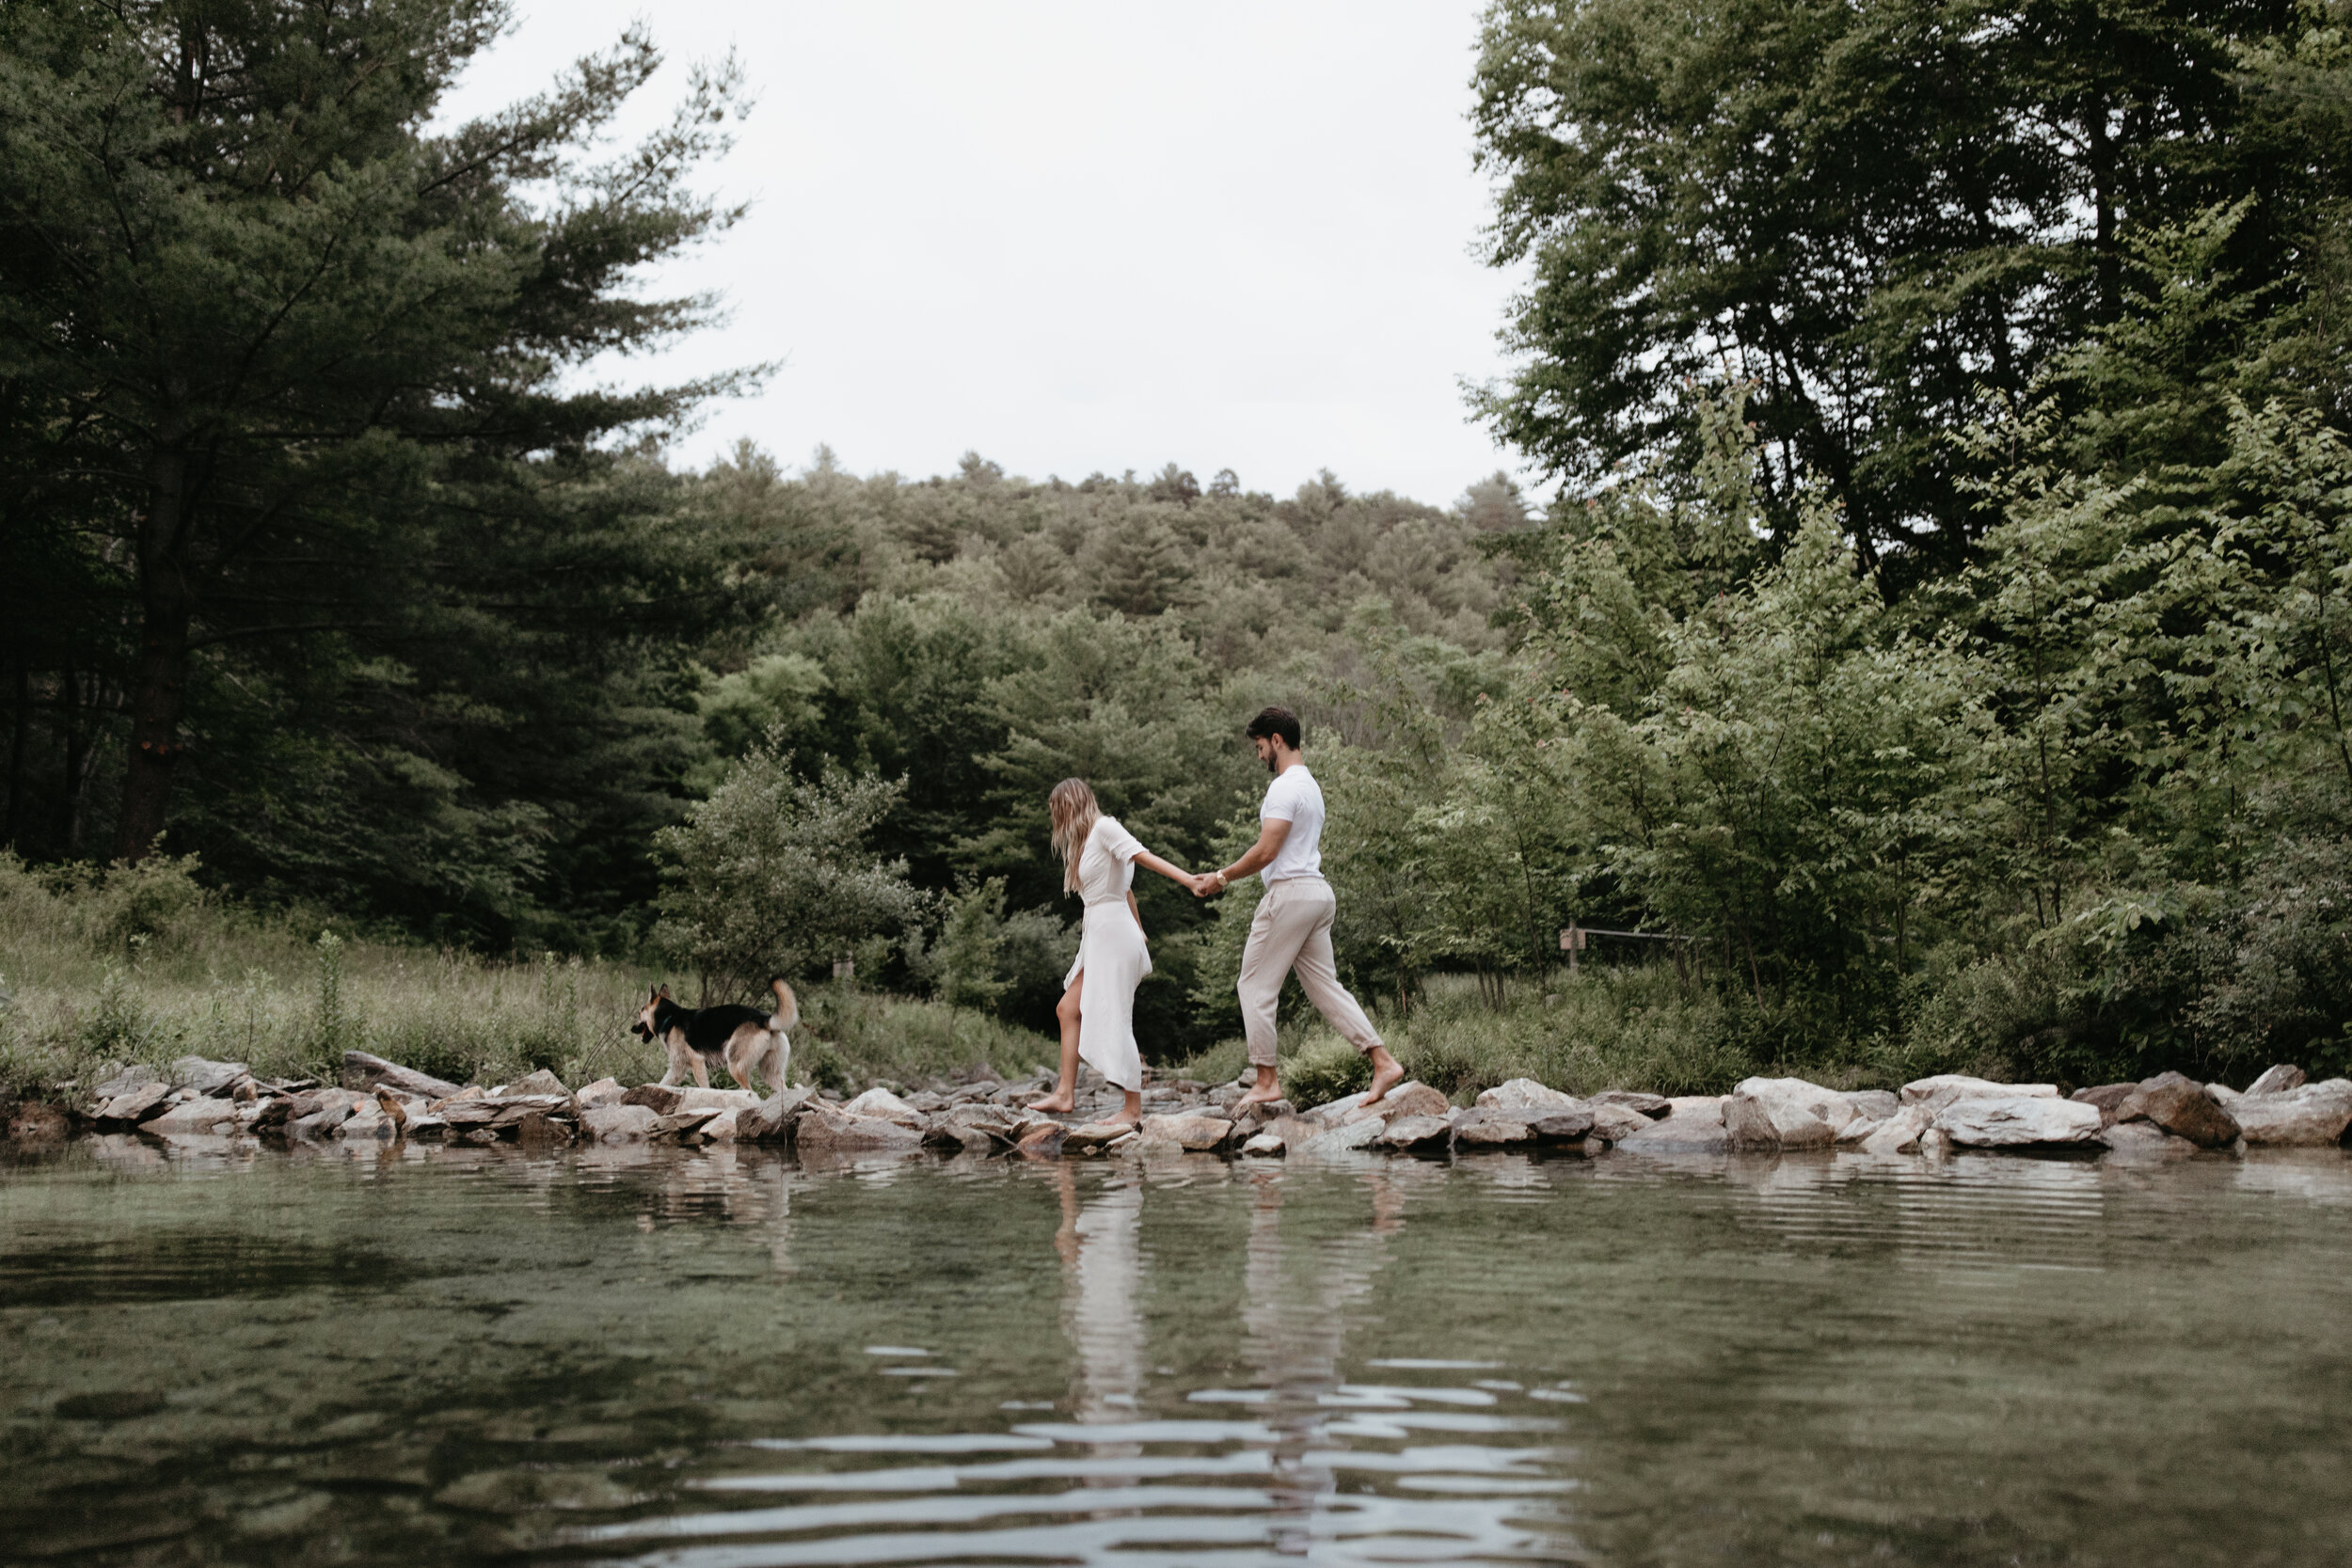 Nicole-Daacke-Photography-michaux-state-forest-elopement-adventure-engagement-session-pennsylvania-elopement-pa-elopement-photographer-gettysburg-photographer-state-park-elopement-engagement-session-pennsylvania-waterfall-177.jpg